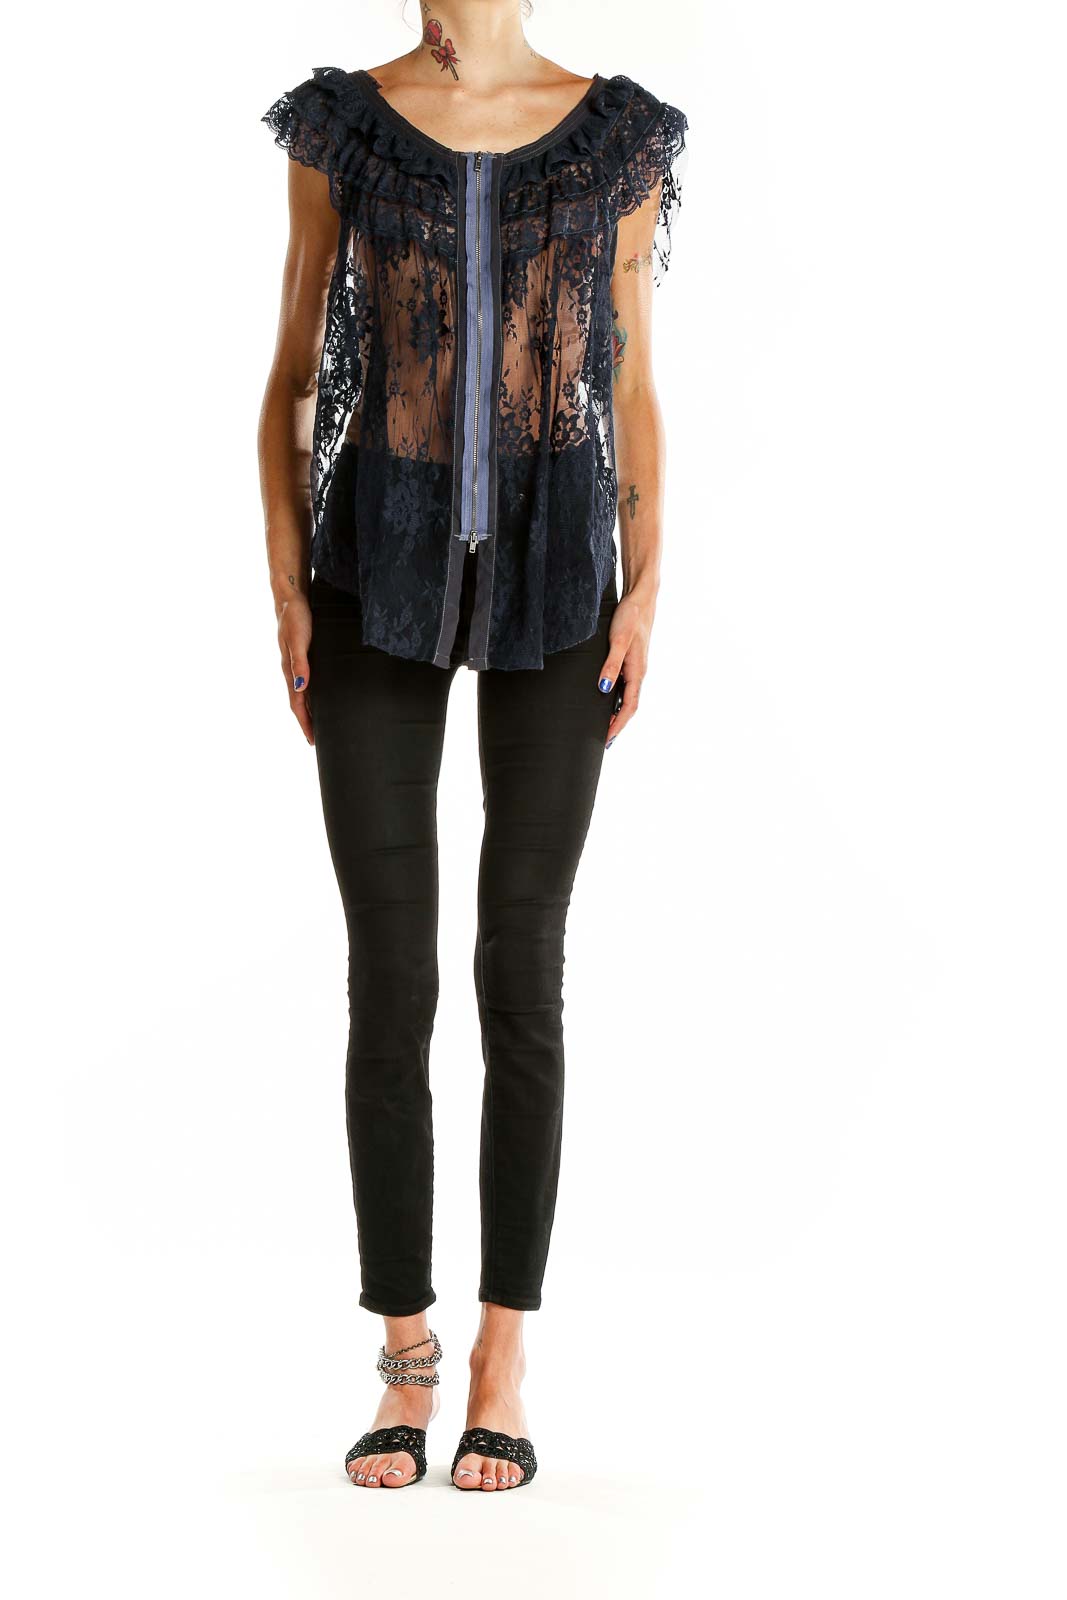 Free People Lace Blue SilkRoll Up - Blouse | Unknown Zip